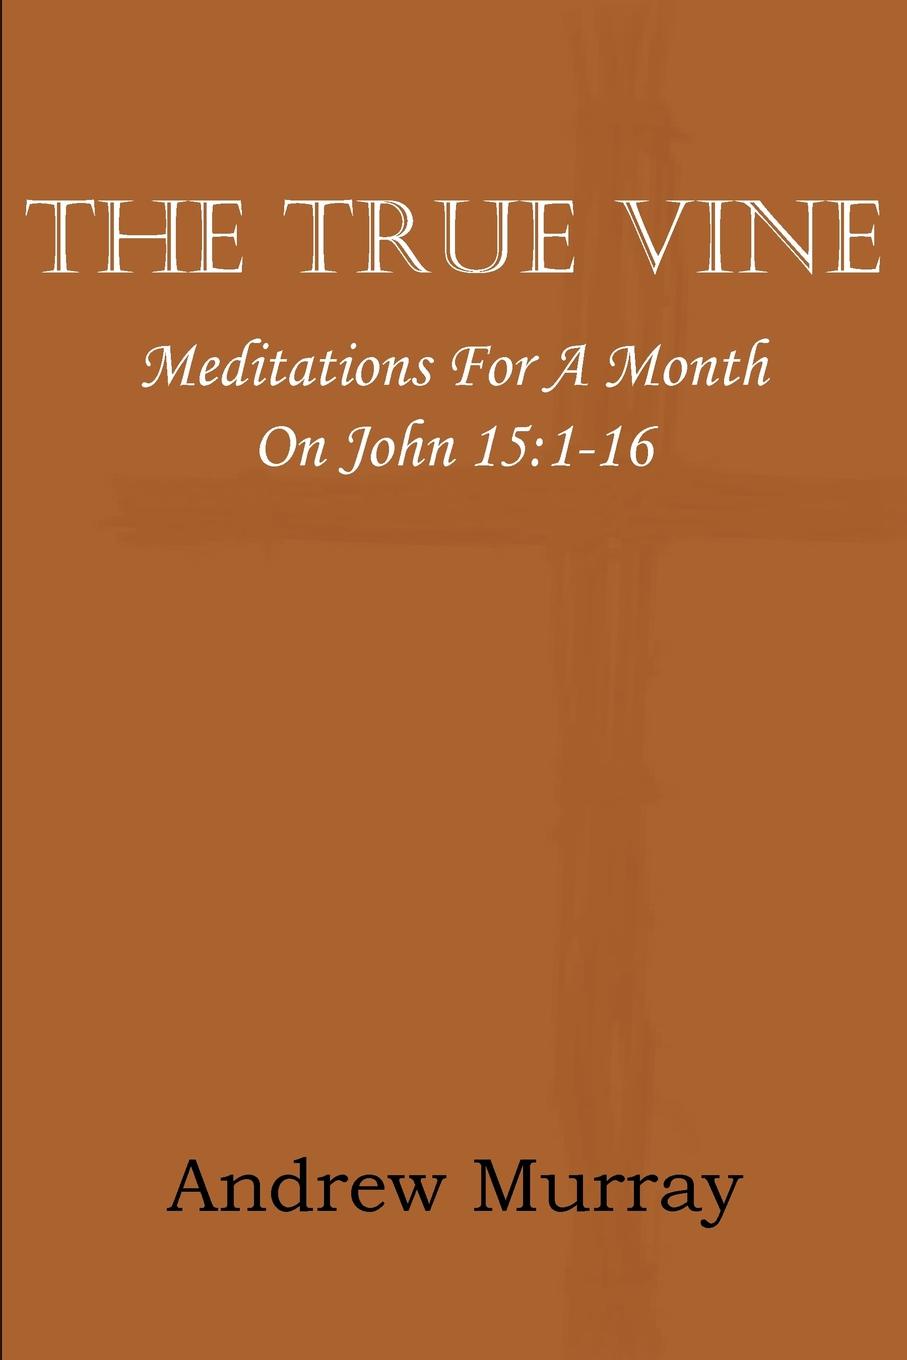 The True Vine; Meditations for a Month on John 15. 1-16